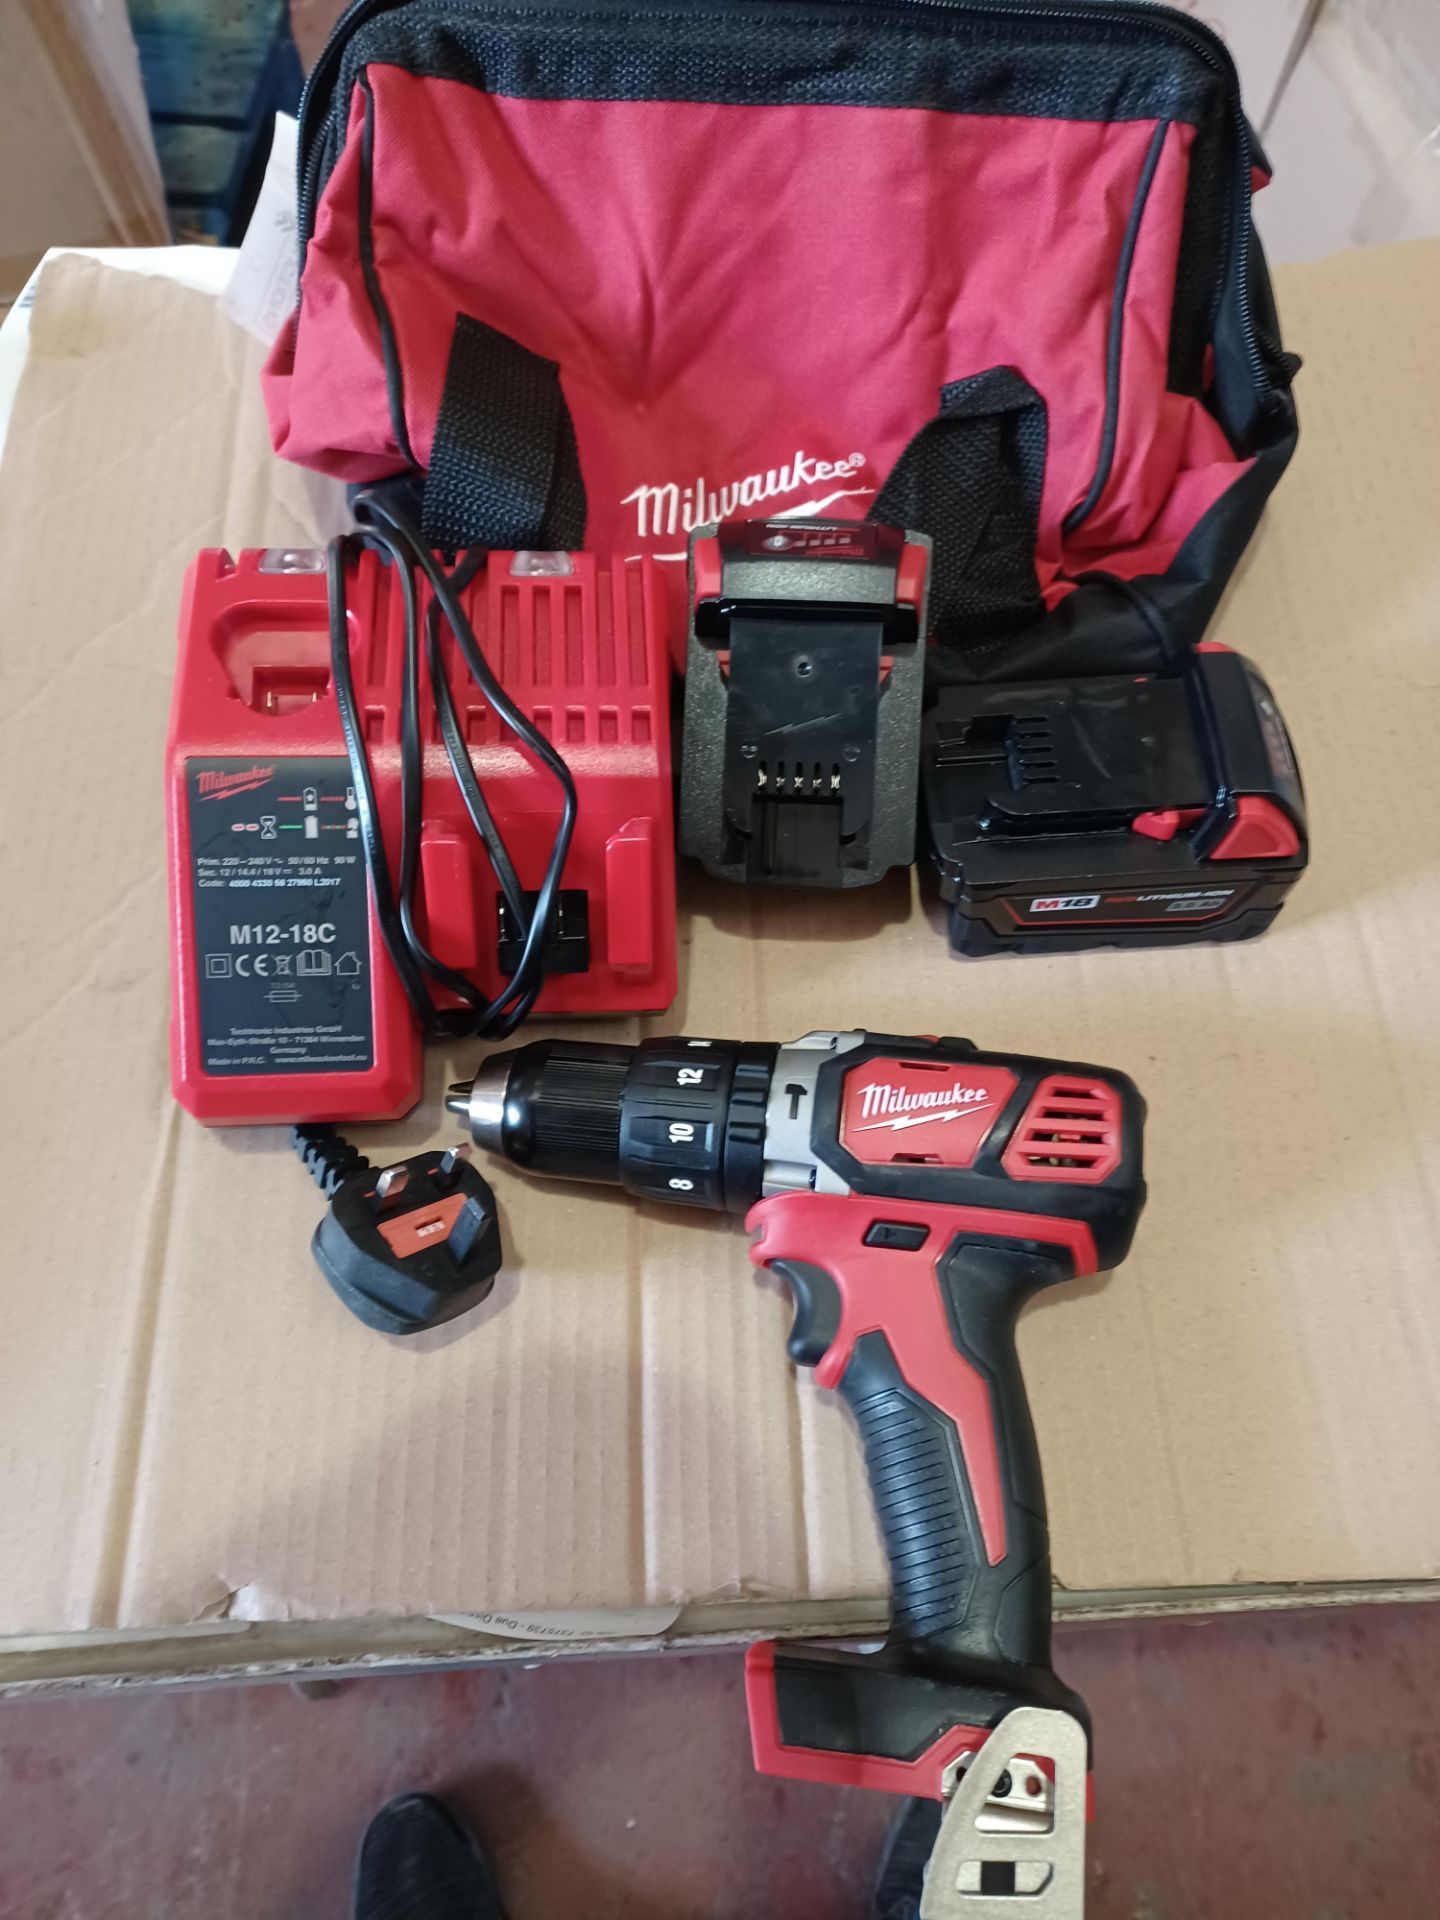 MILWAUKEE M18 BPD LI ION BRUSHLESS WITH 2 BATTERIES CHARGER AND CARRY KIT - BW